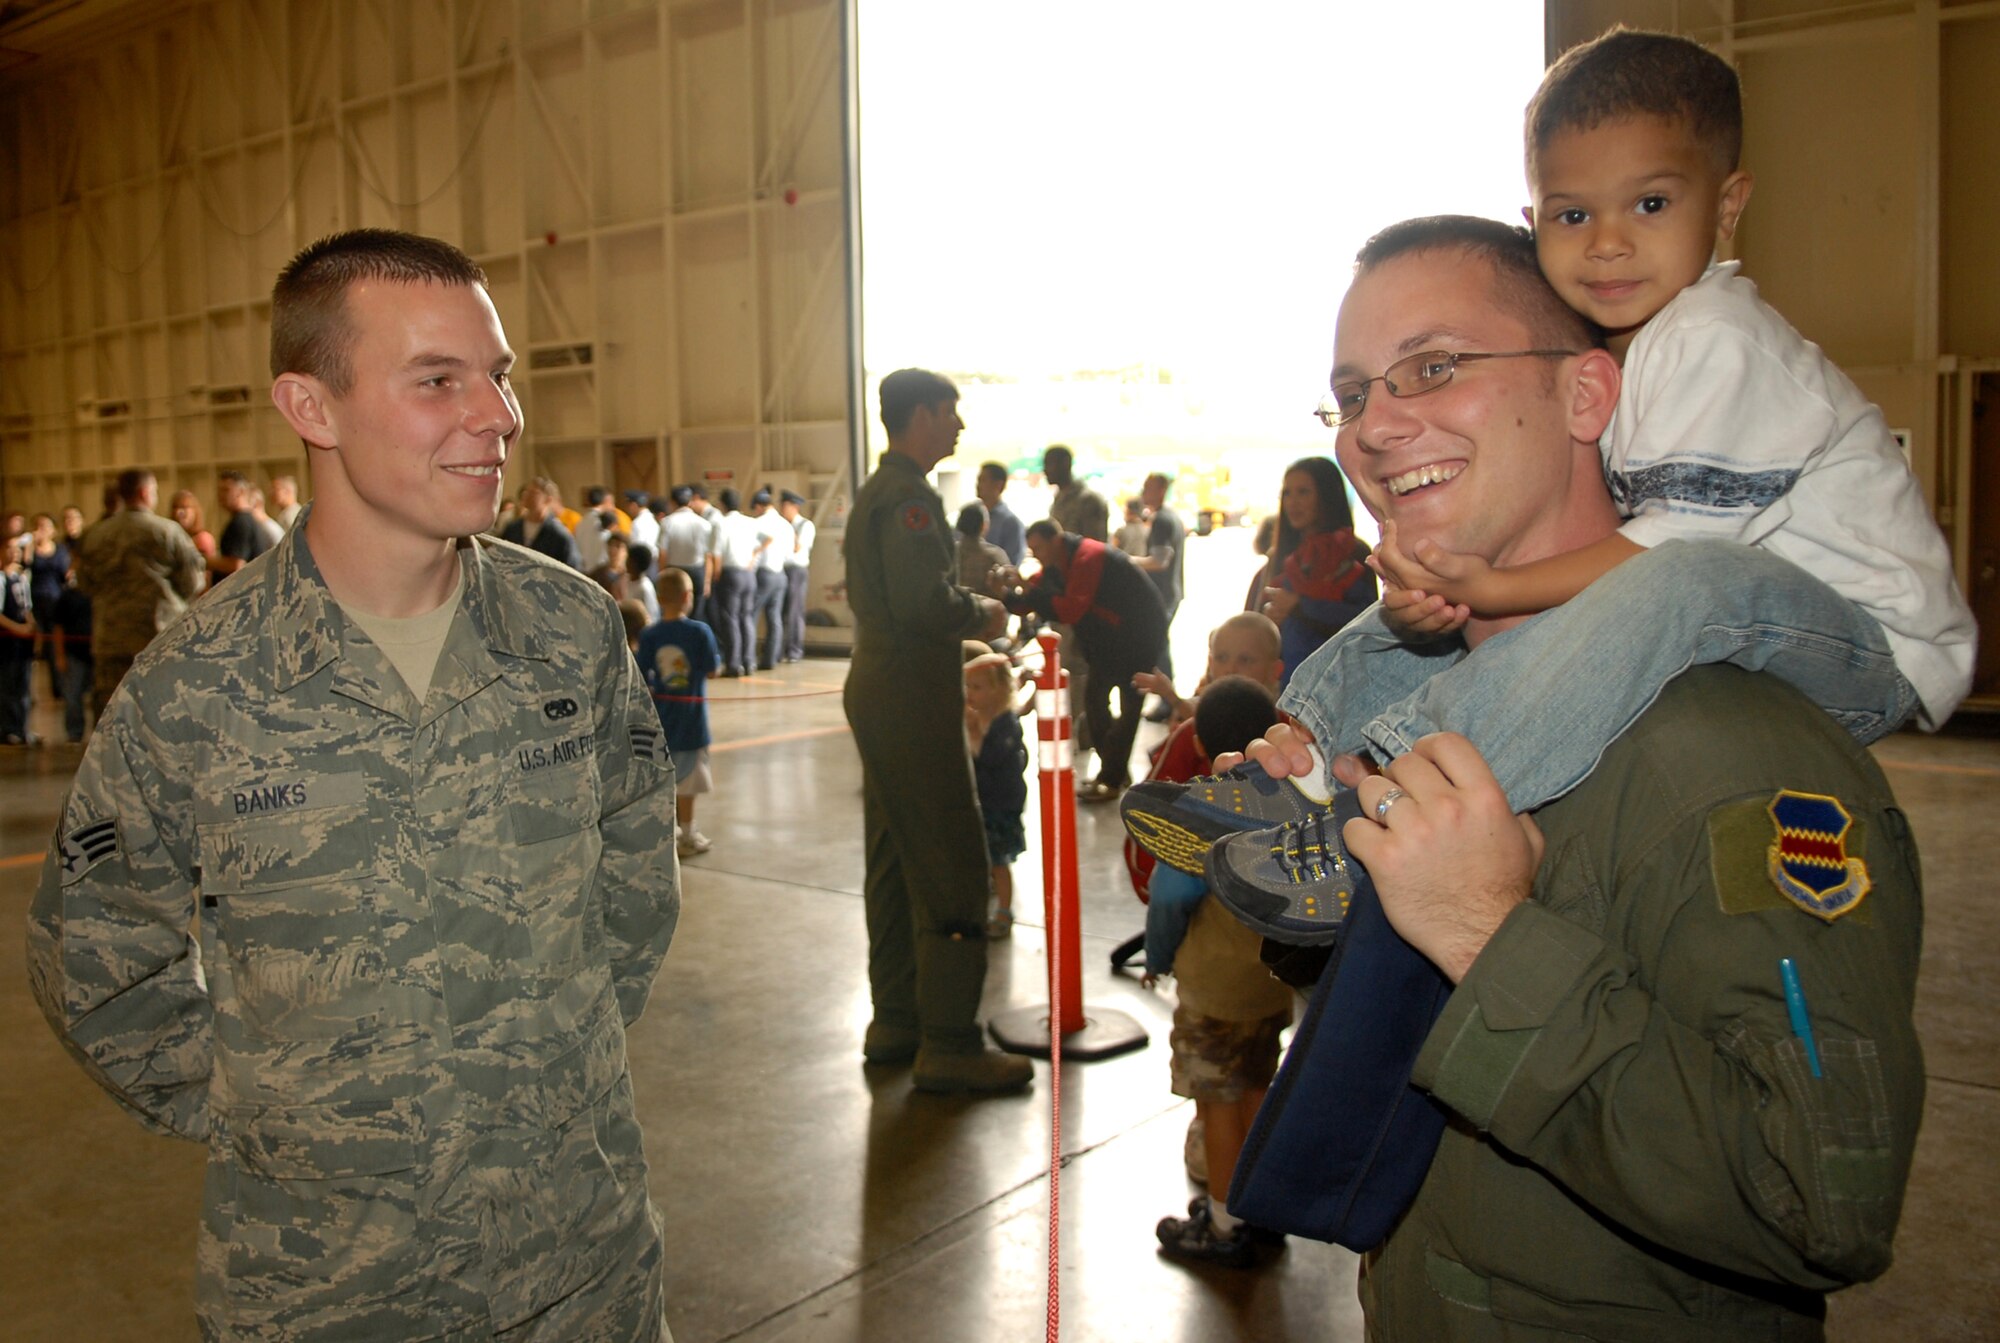 Staff Sgt. Warren G. Biles, from the 390th Intelligence Squadron, and his three-year-old son Bay Jadon Biles talk with Senior Airman Nicholas Banks, a 1st Fighter Wing crew chief from Langley Air Force Base, Va. Meet the Raptor Day was hosted by the 18th Wing and the 27th Expeditionary Fighter Squadron at the Kadena Air Base Jan. 30. (US Air Force photo/Junko Kinjo)